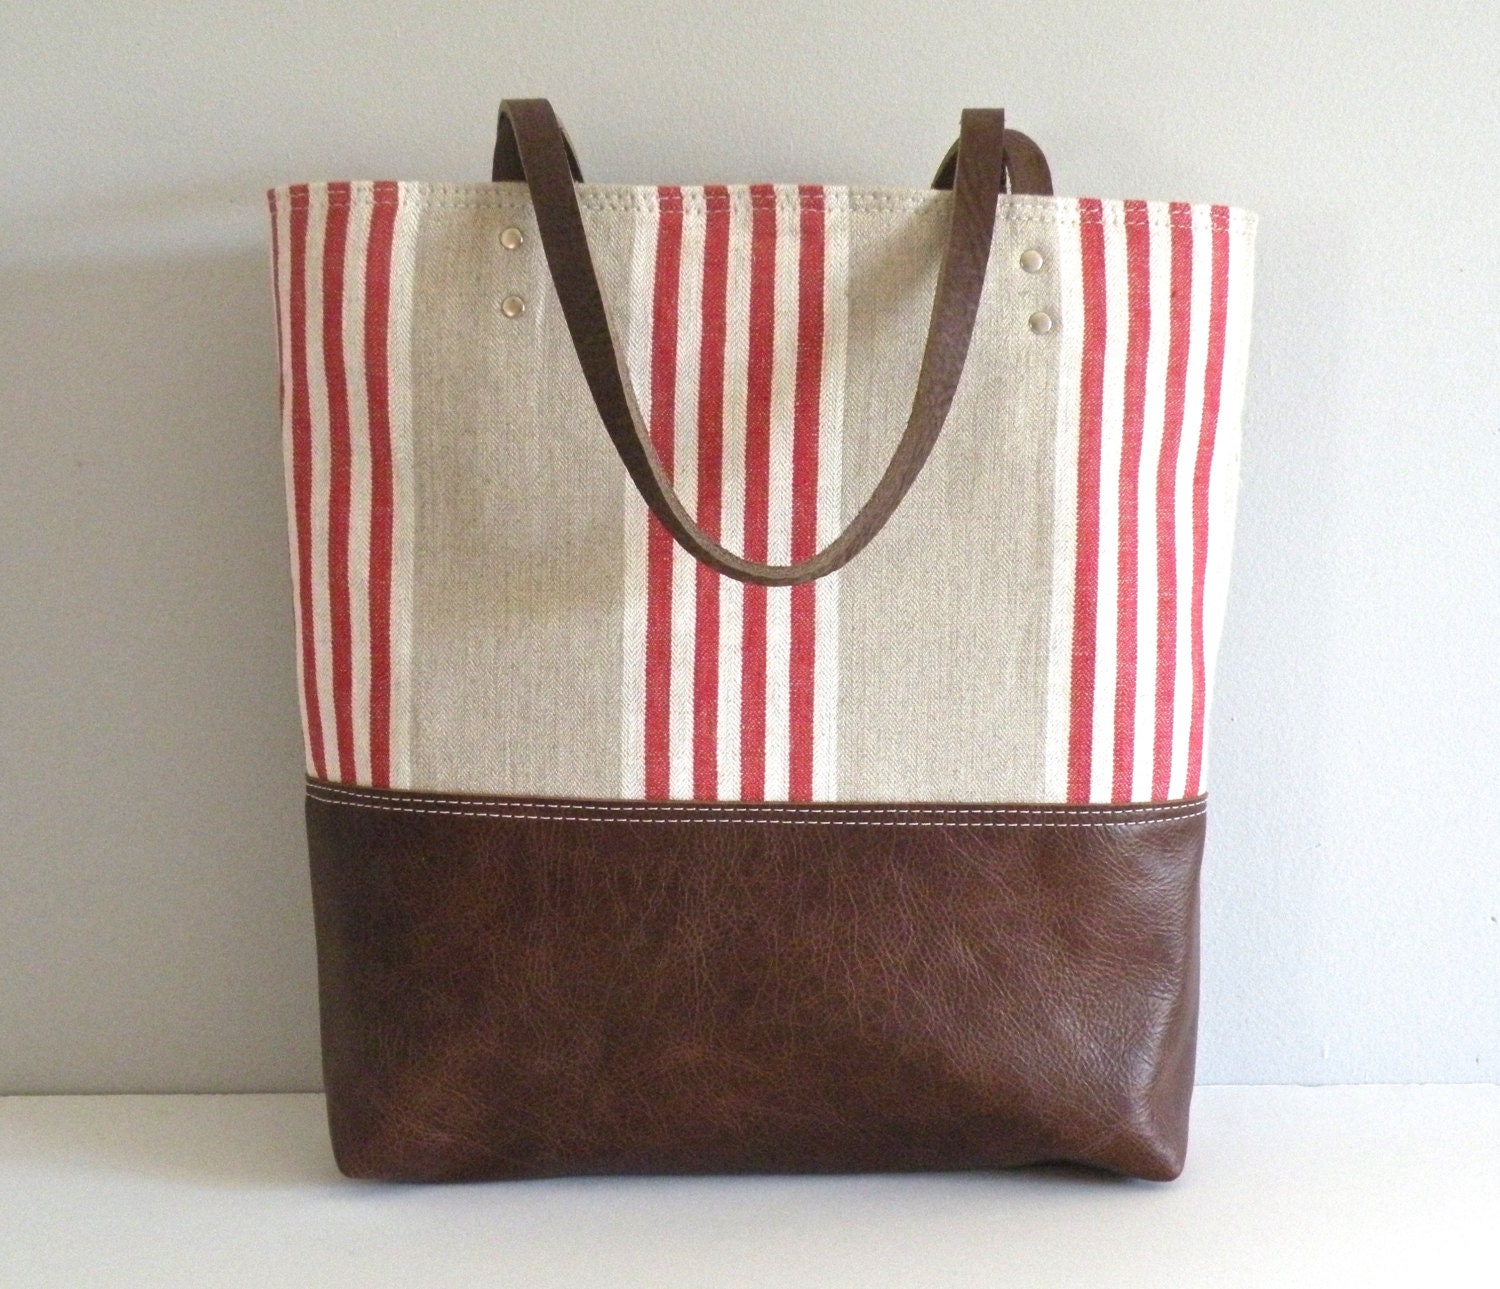 Linen Tote Leather Bottom bag Beach carryall red striped